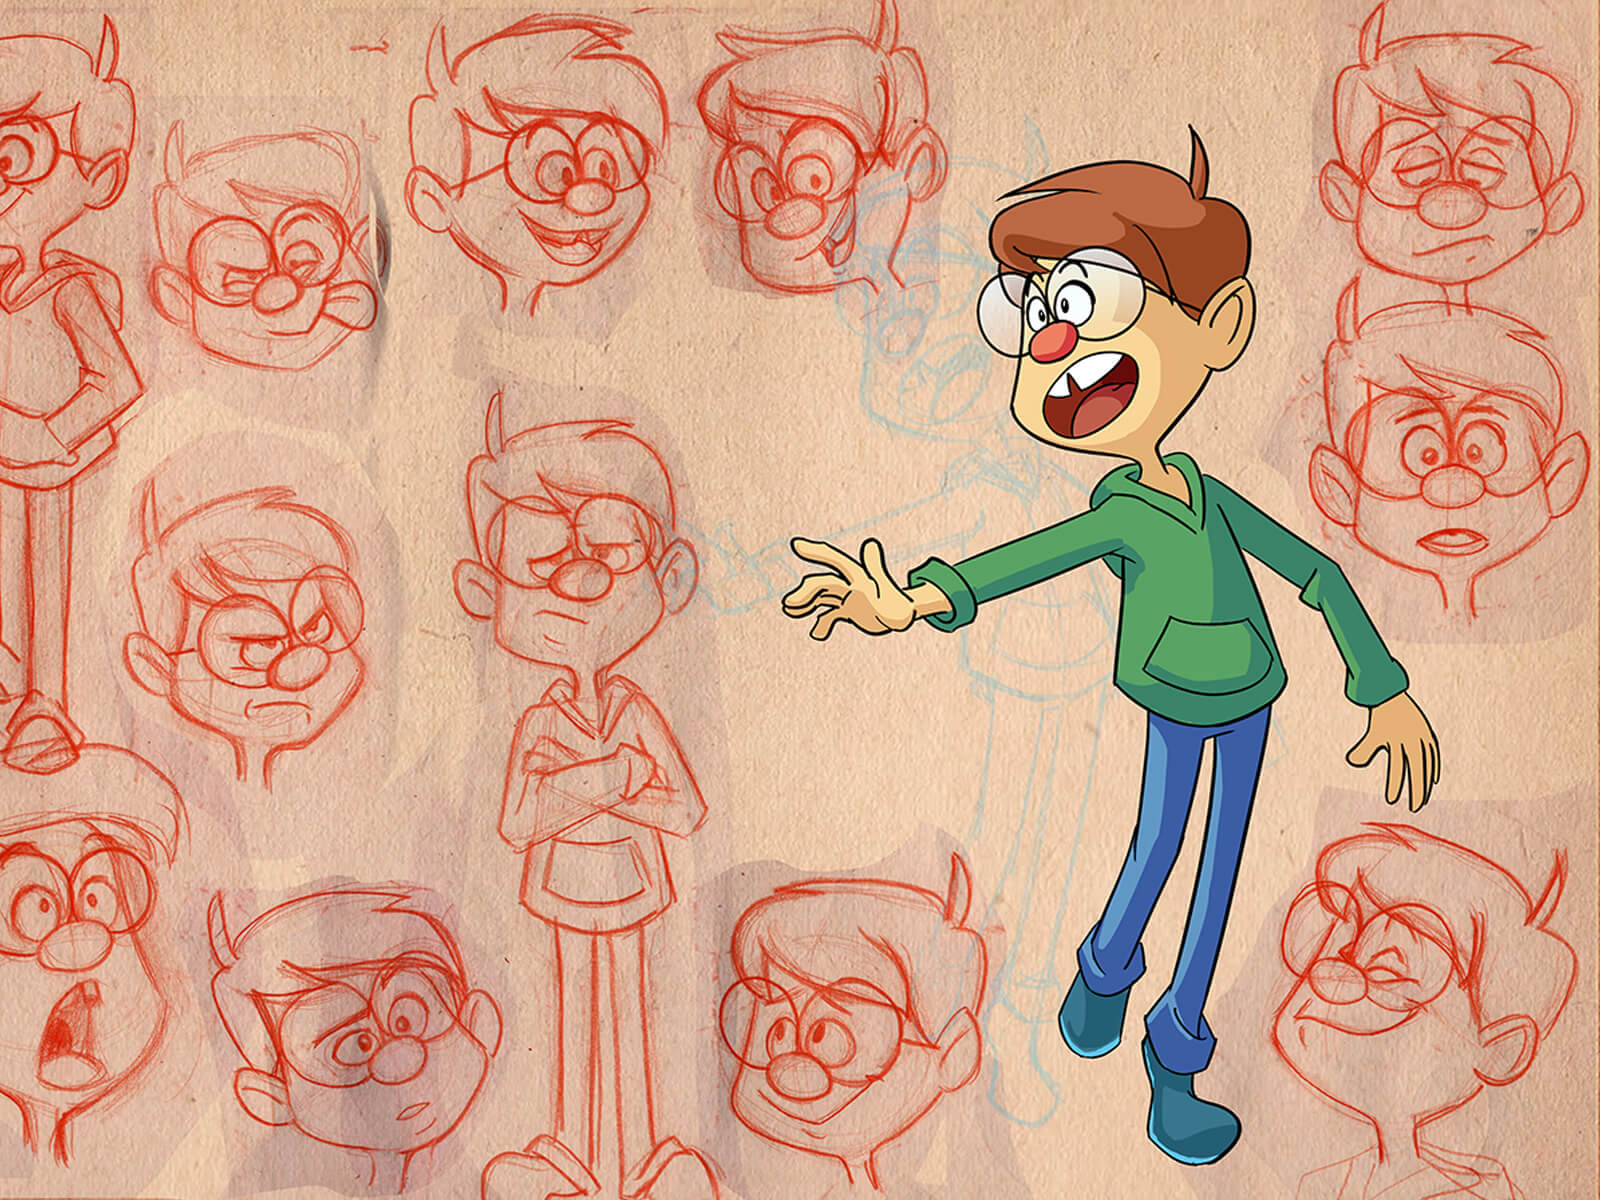 digital painting of the various facial expressions and gestures of a glasses-and-green-hoodie wearing character named Tony 